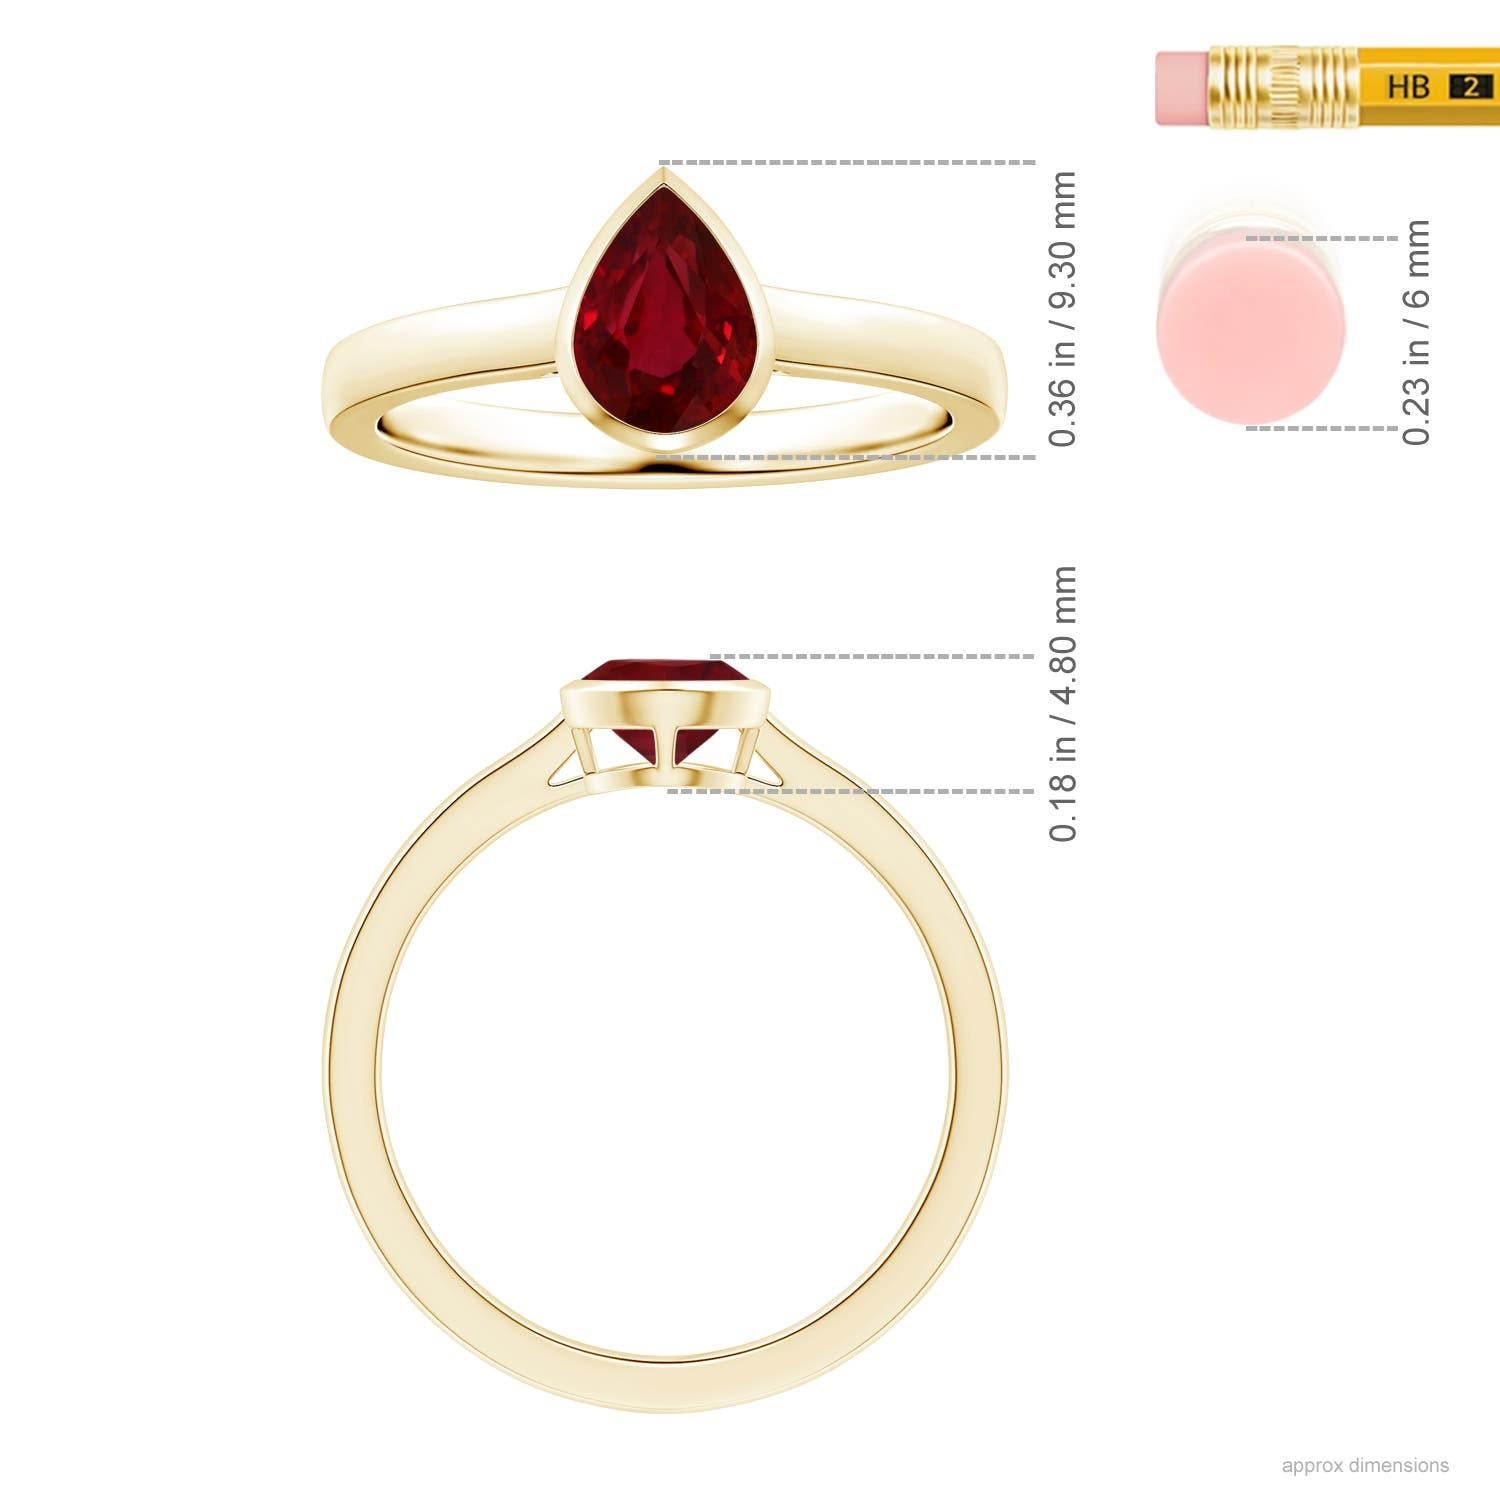 For Sale:  ANGARA Bezel-Set GIA Certified Pear-Shaped Ruby Solitaire Ring in Yellow Gold 5